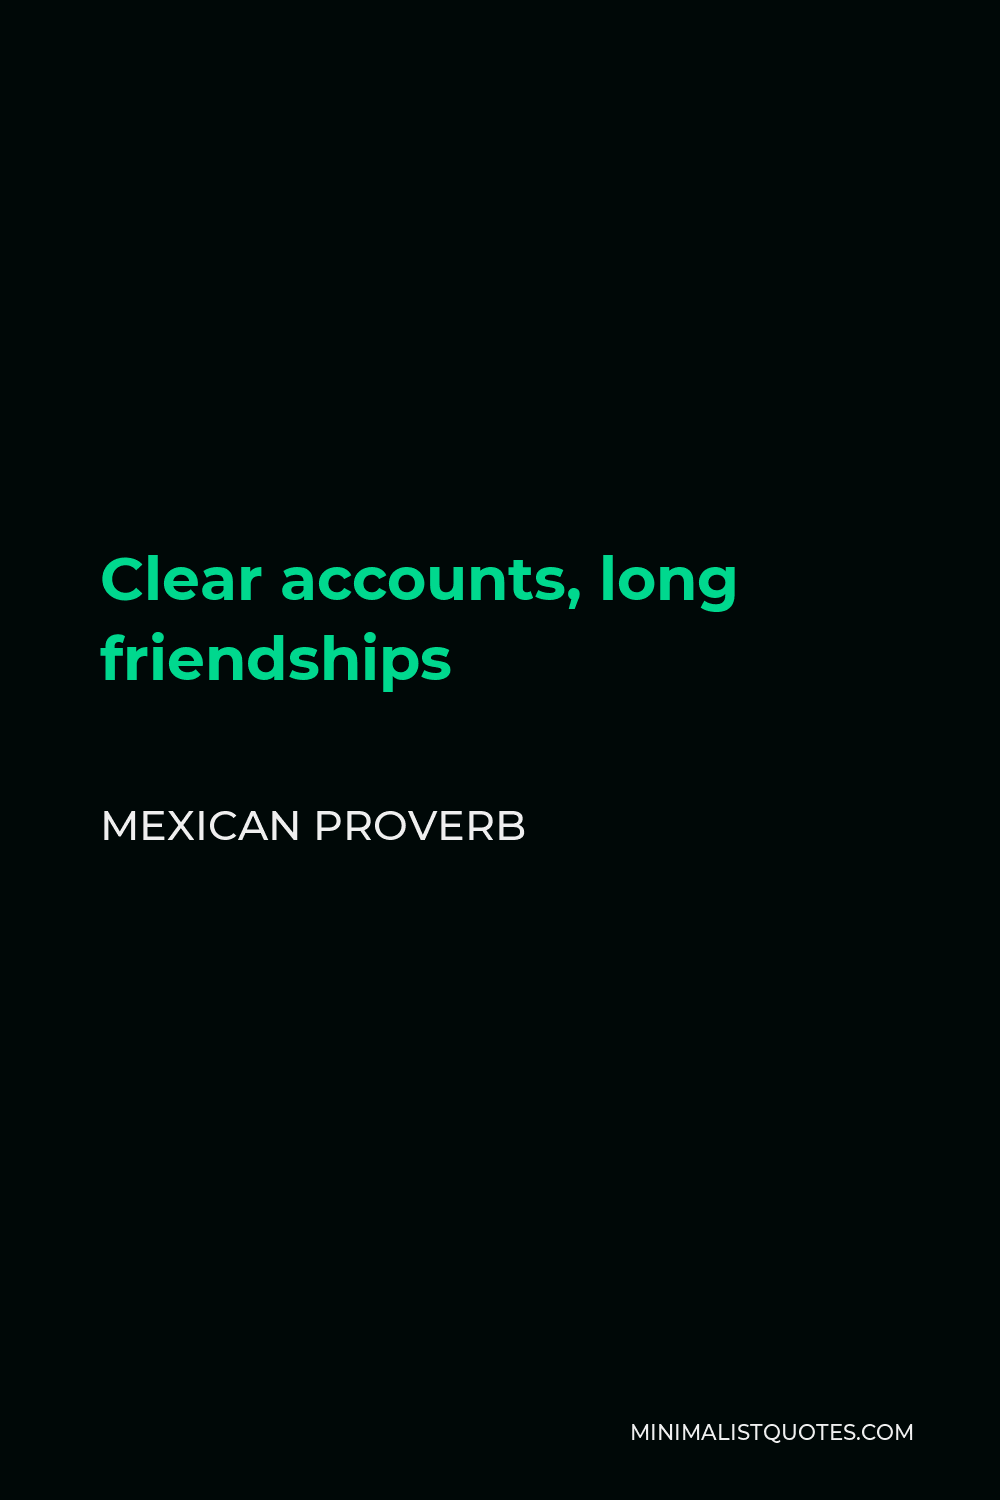 Mexican Proverb Quote - Clear accounts, long friendships